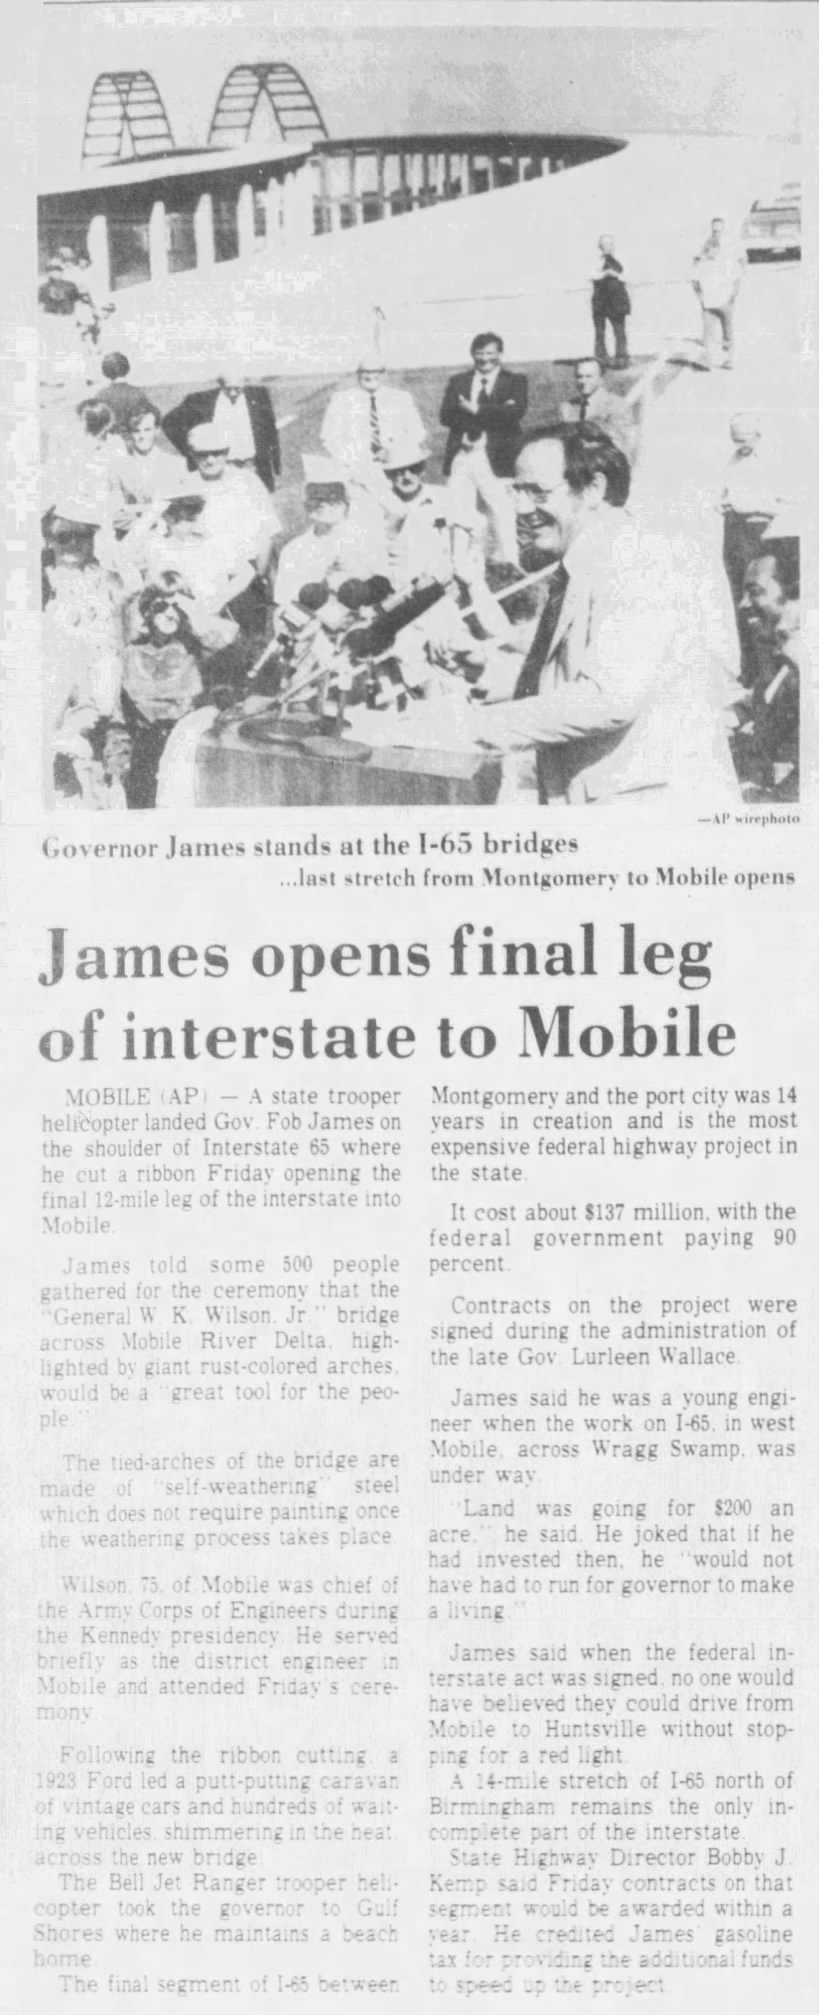 James opens final leg of interstate to Mobile